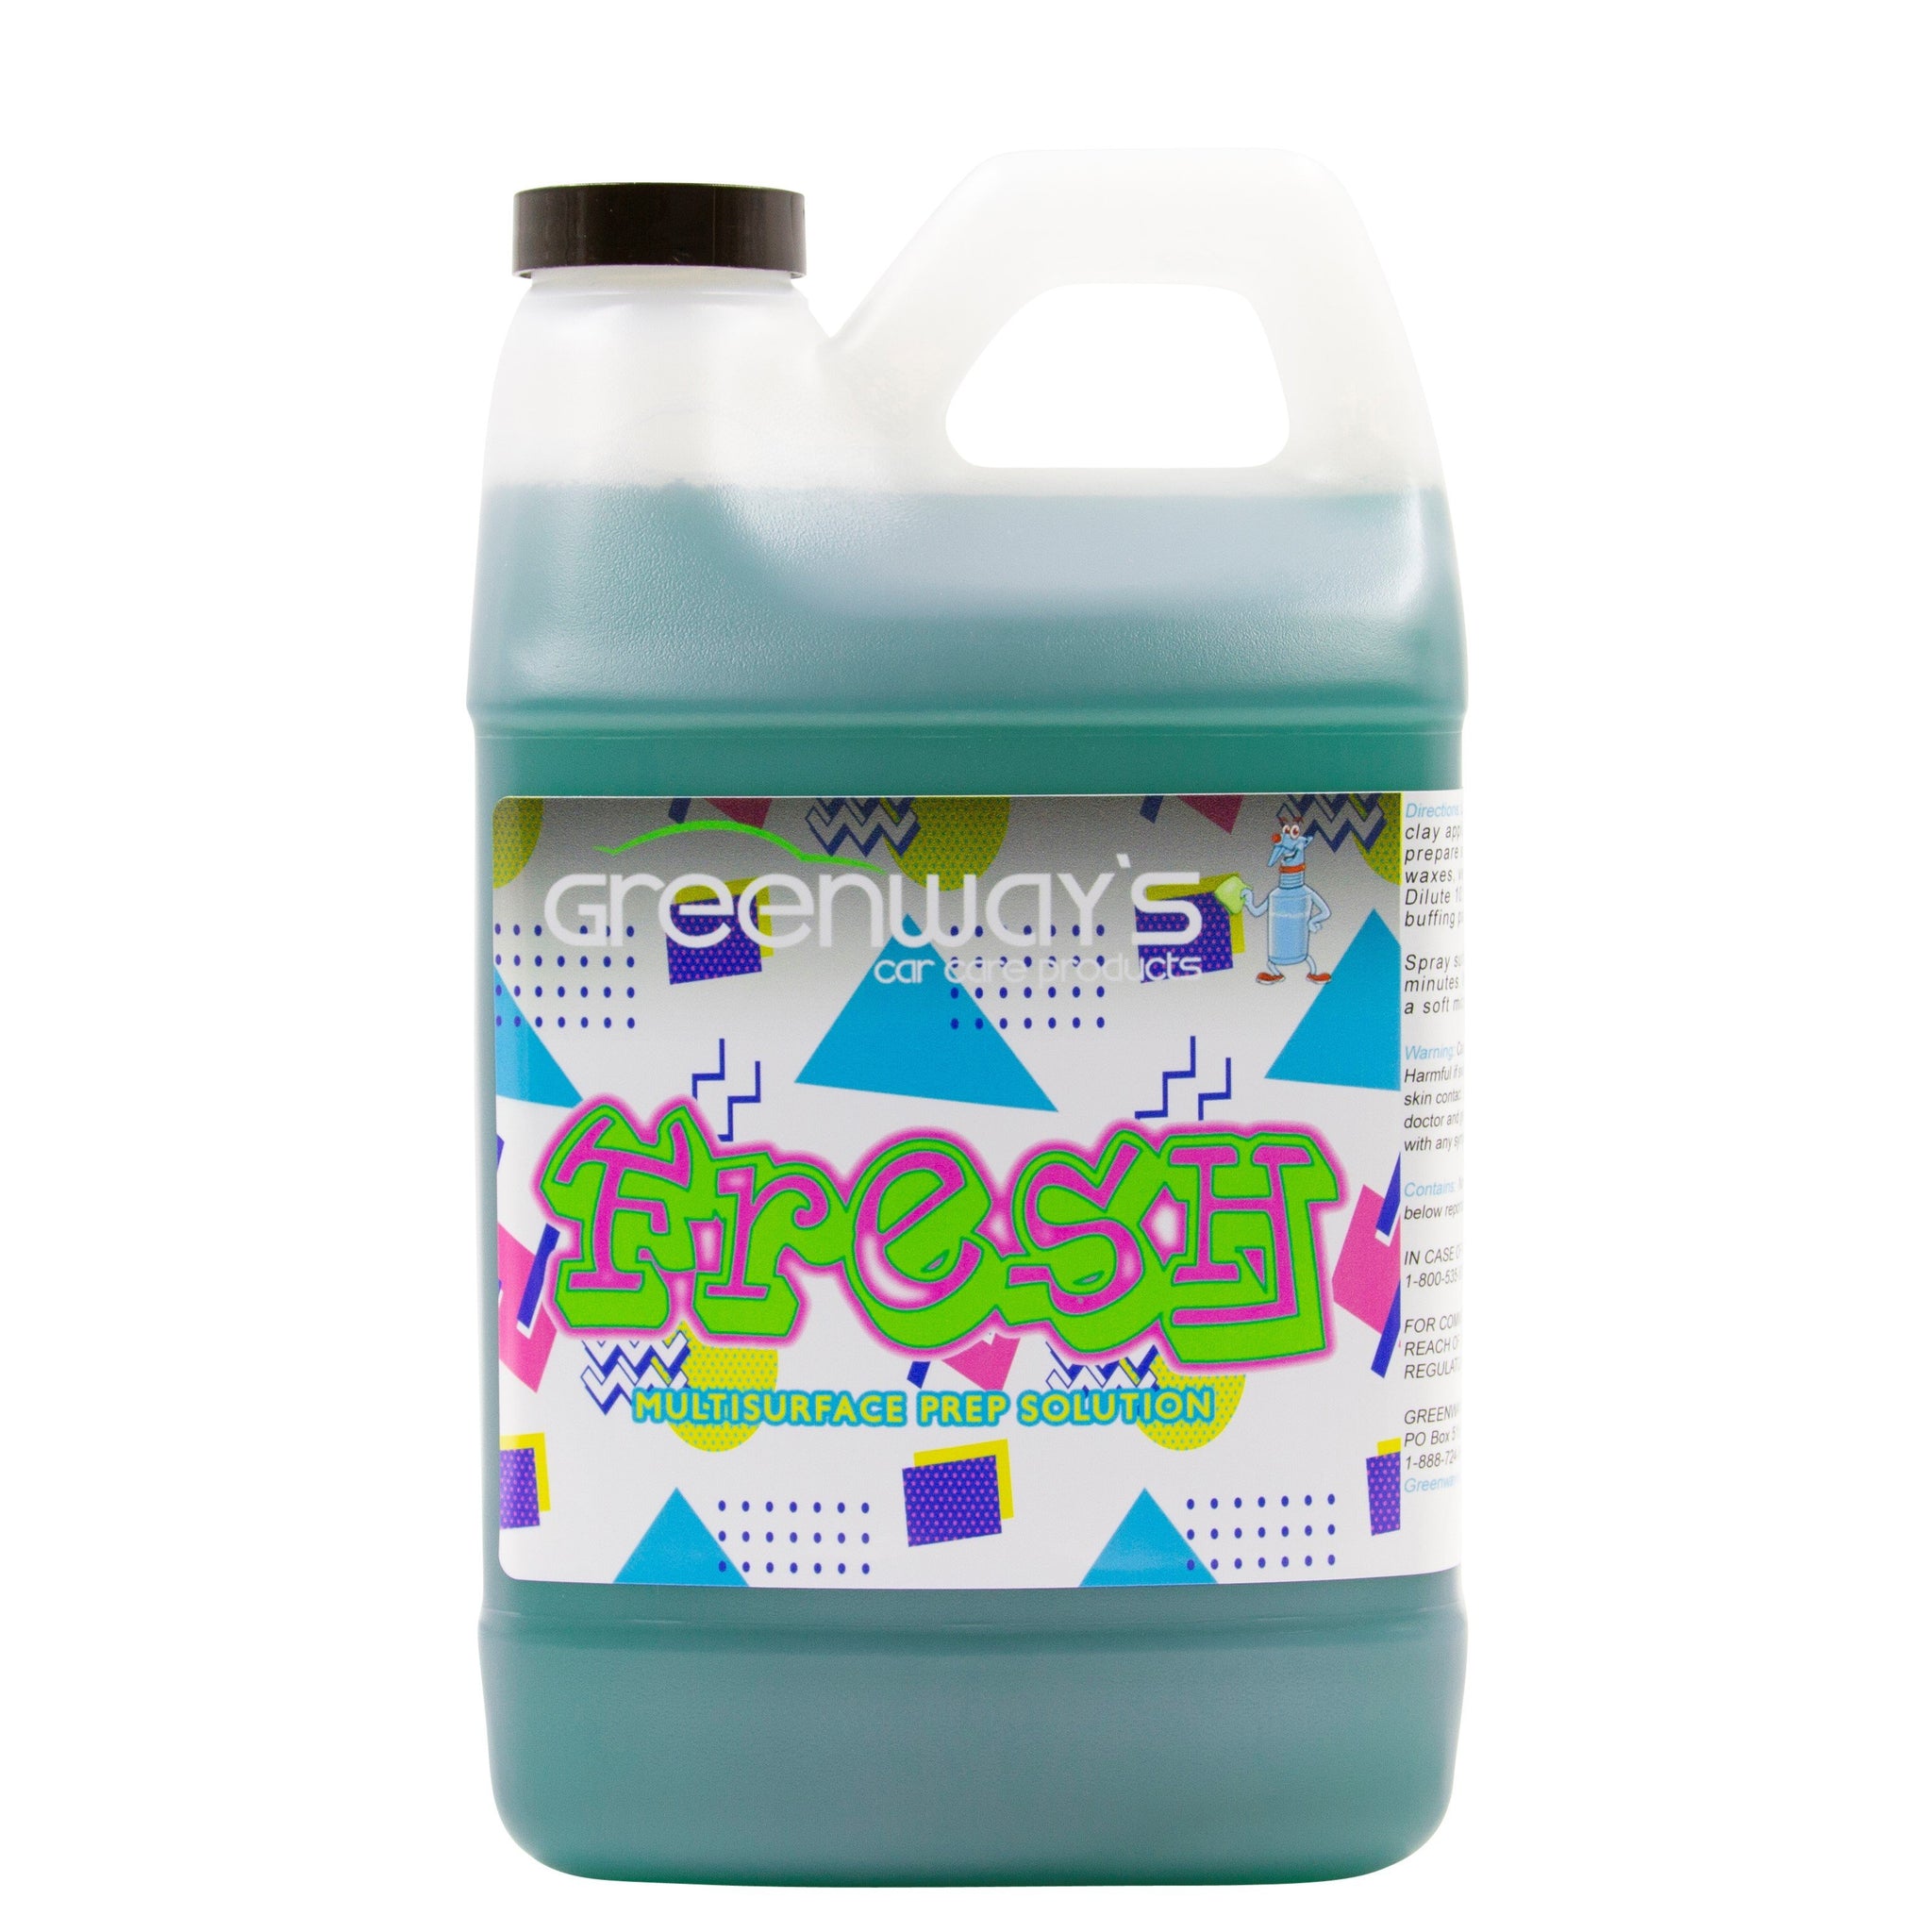 Greenway’s Fresh, car paint preparation, multi-surface cleaning solution, buffing pad cleaner, custom scented, 64 ounces.